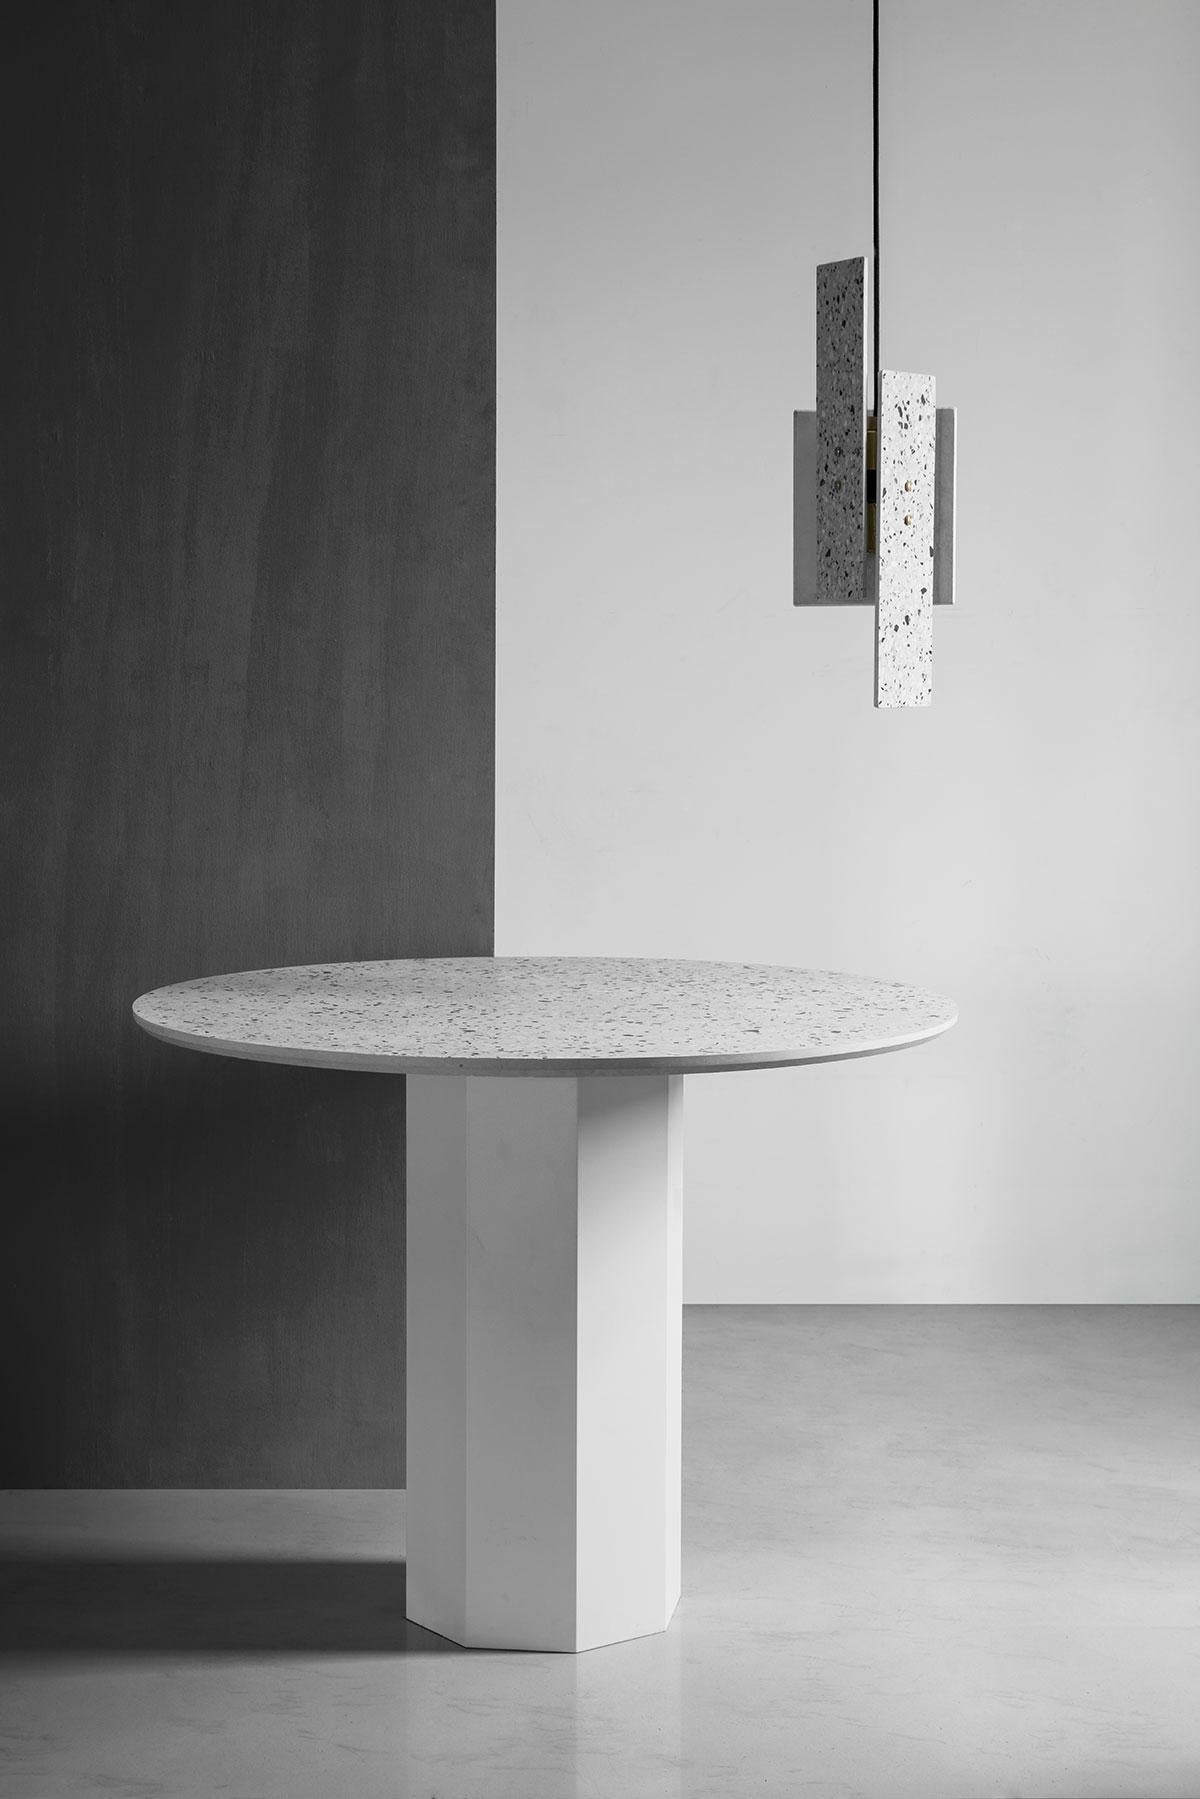 'GONG' is a dining table made of terrazzo and steel.
by Bentu Design

Indoor or outdoor use.
Dimensions: Ø100cm x H75 cm


Bentu Design's furniture derives its uniqueness from the simplicity of its forms and its materials. Designed and manufactured